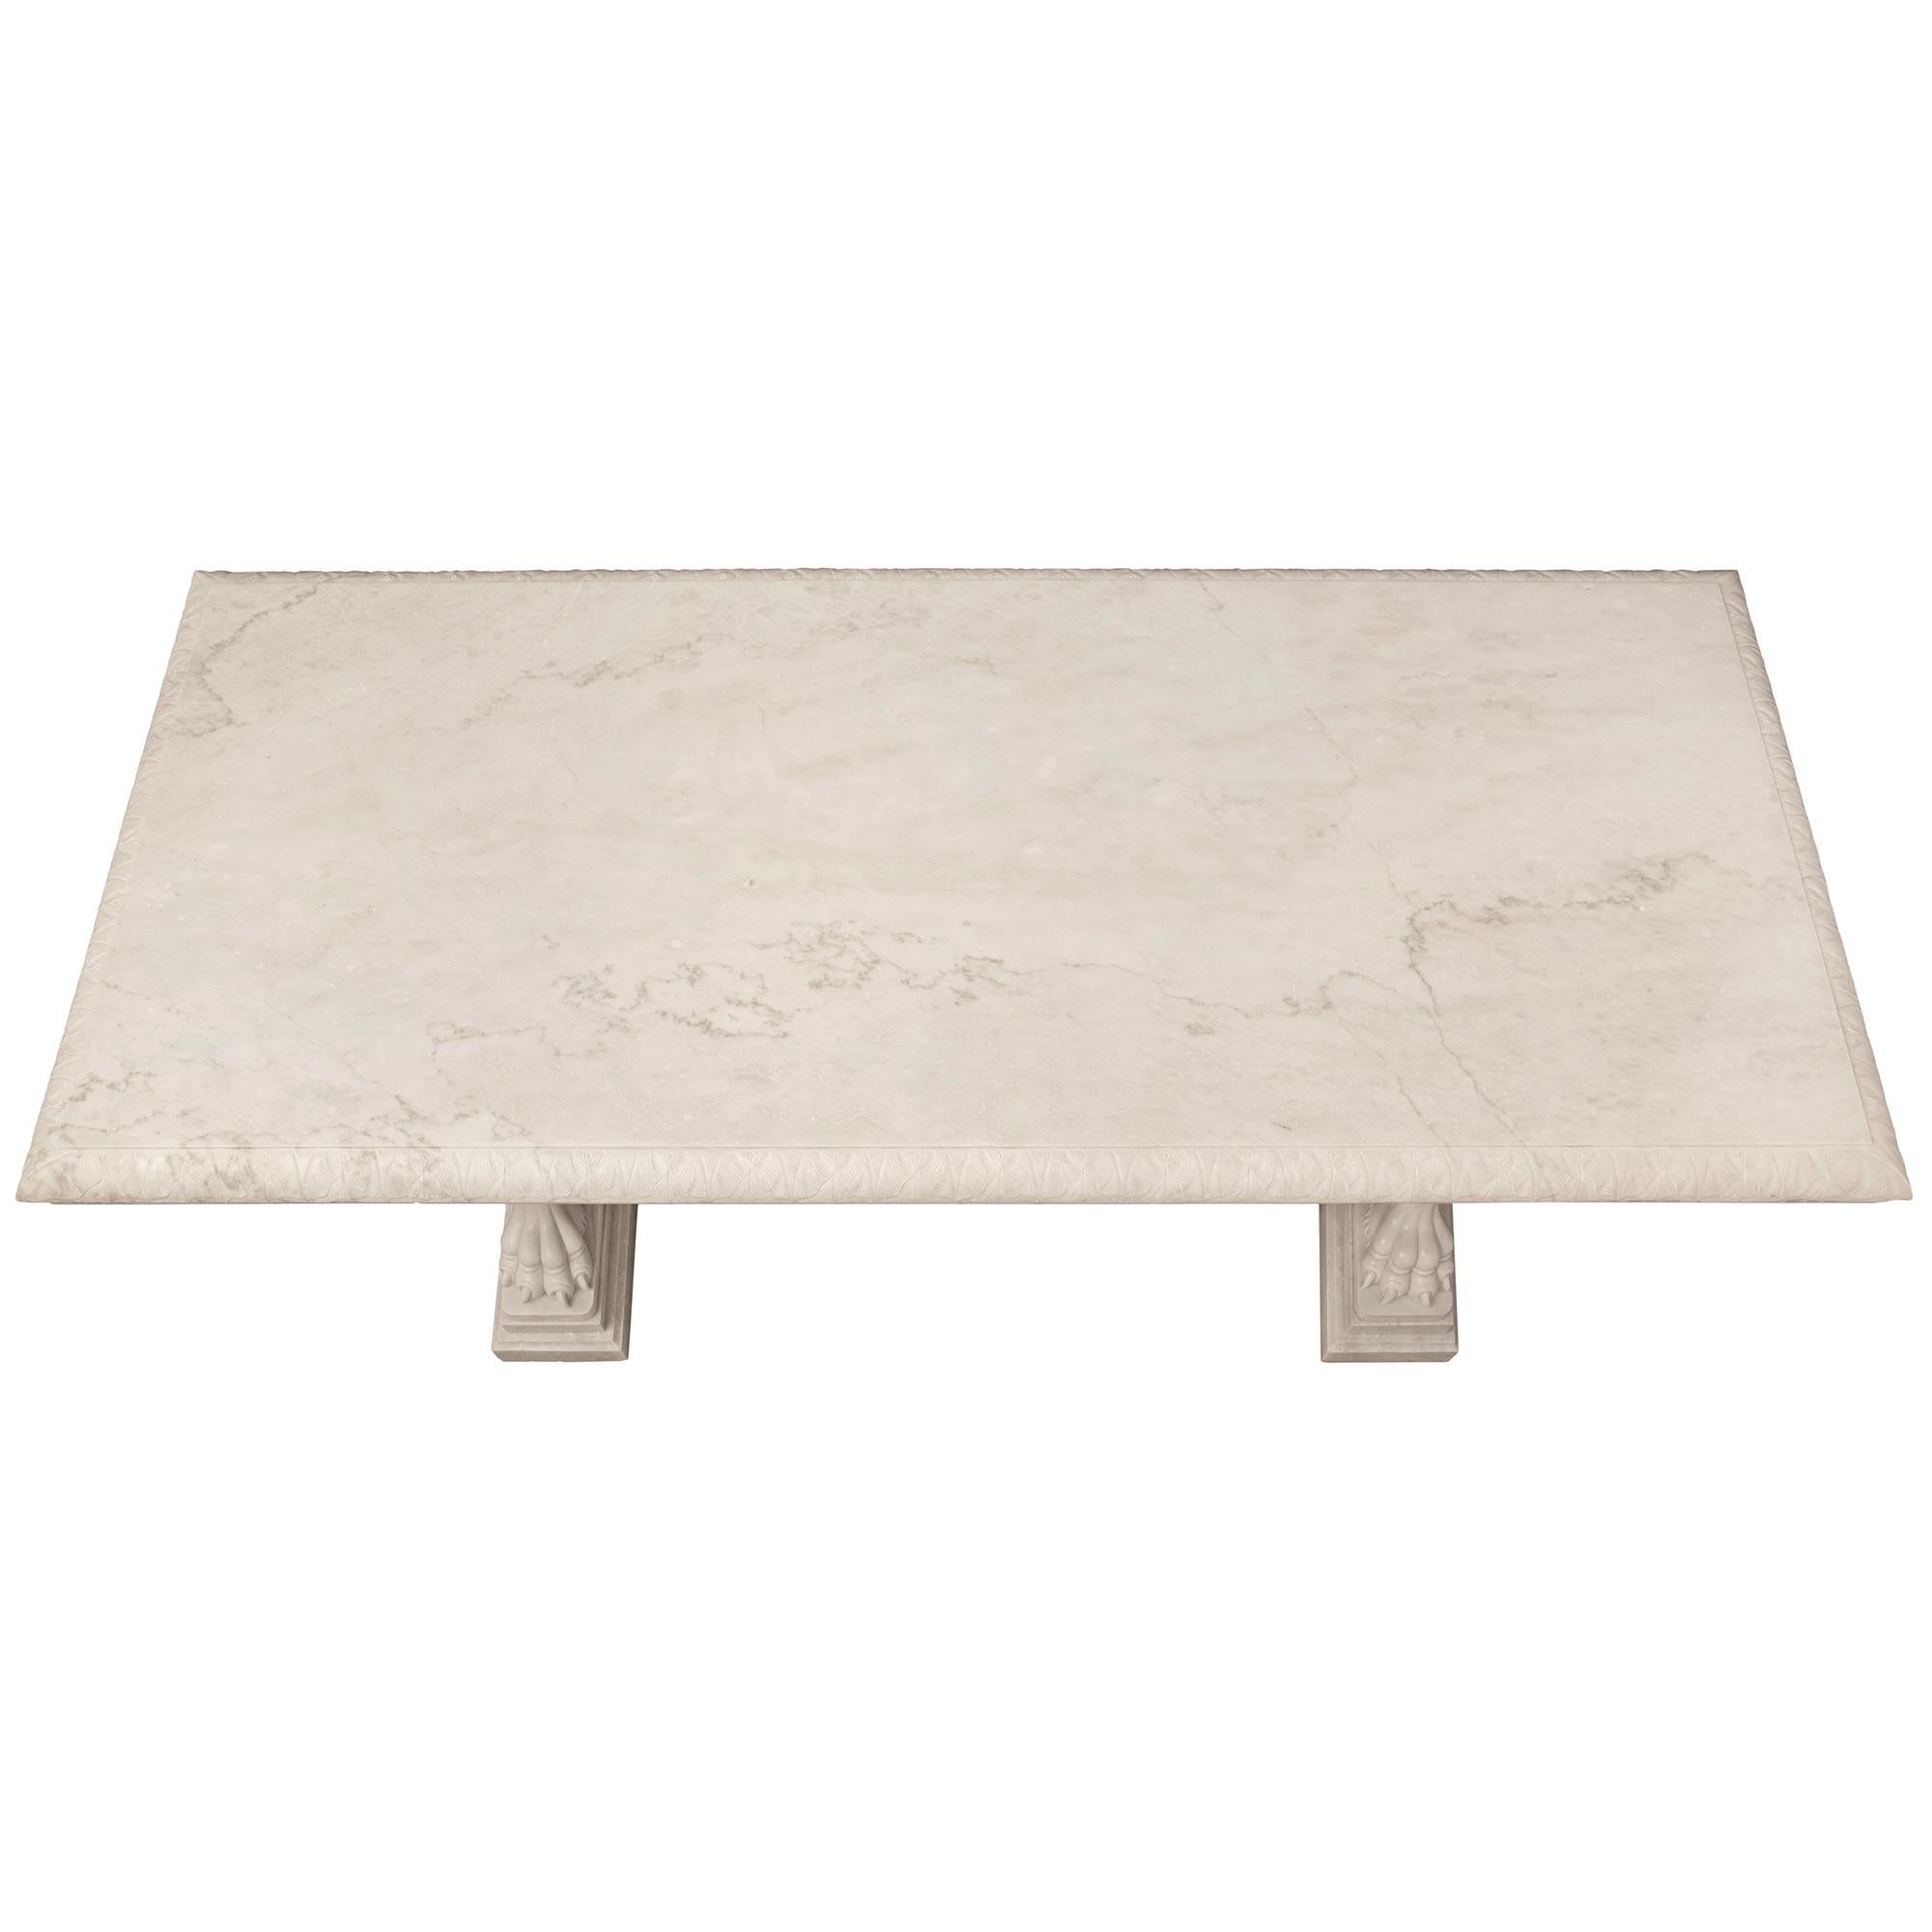 A spectacular and most impressive Italian 19th century neo-classical st. white Carrara marble center table. The monumentally scaled rectangular table is raised by stunning intricately detailed supports each displaying a fine mottled stepped base